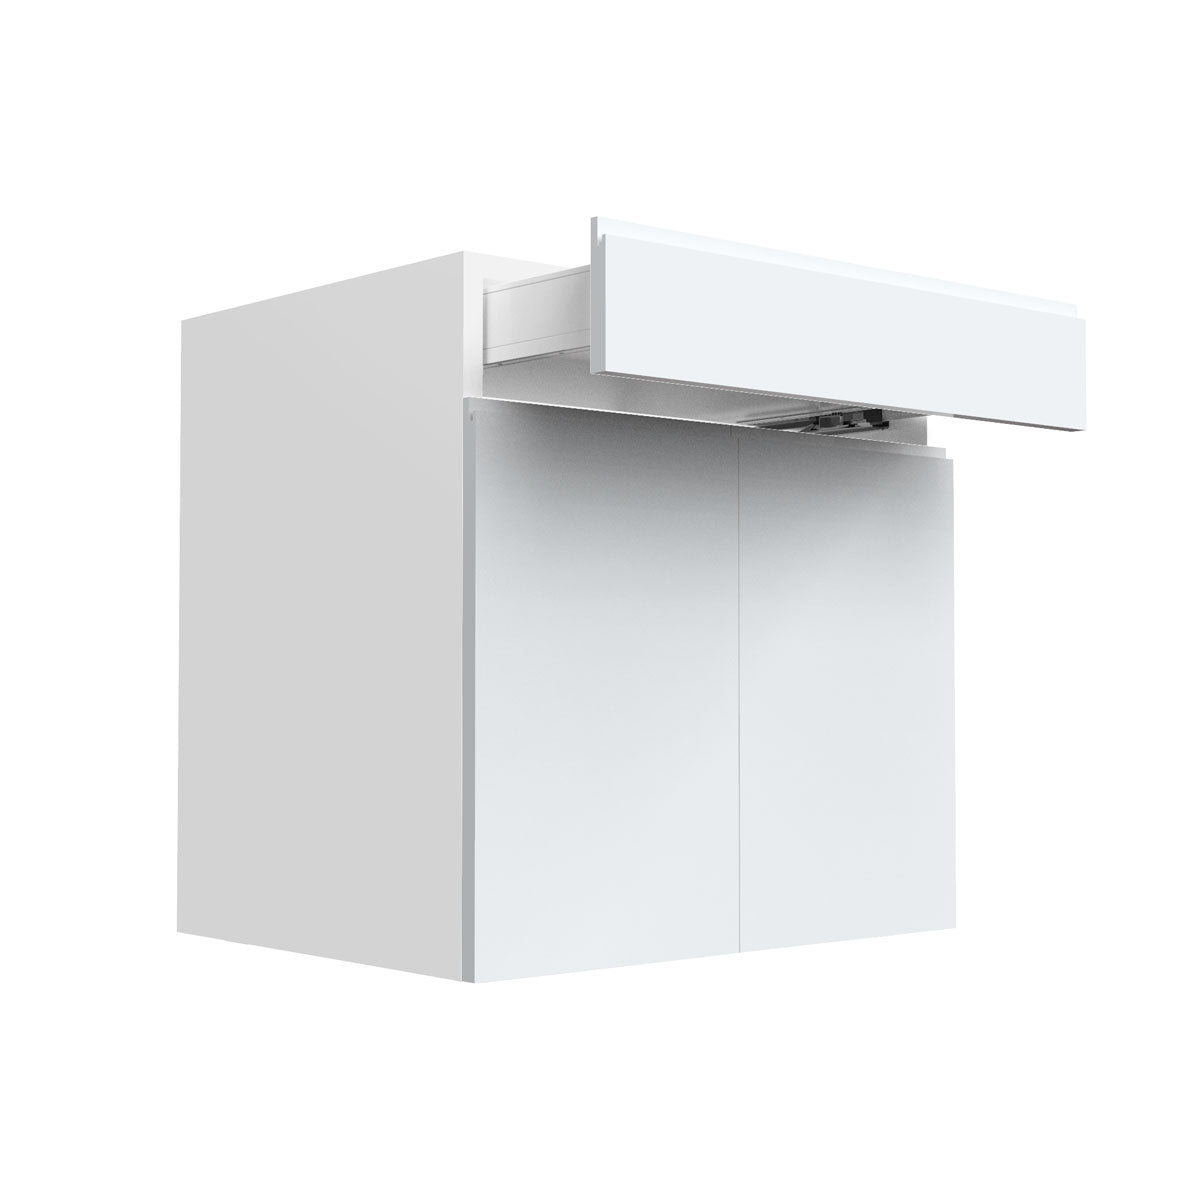 Vanity Cabinet - RTA - Lacquer White - Double Door | 30"W x 34.5"H x 21"D